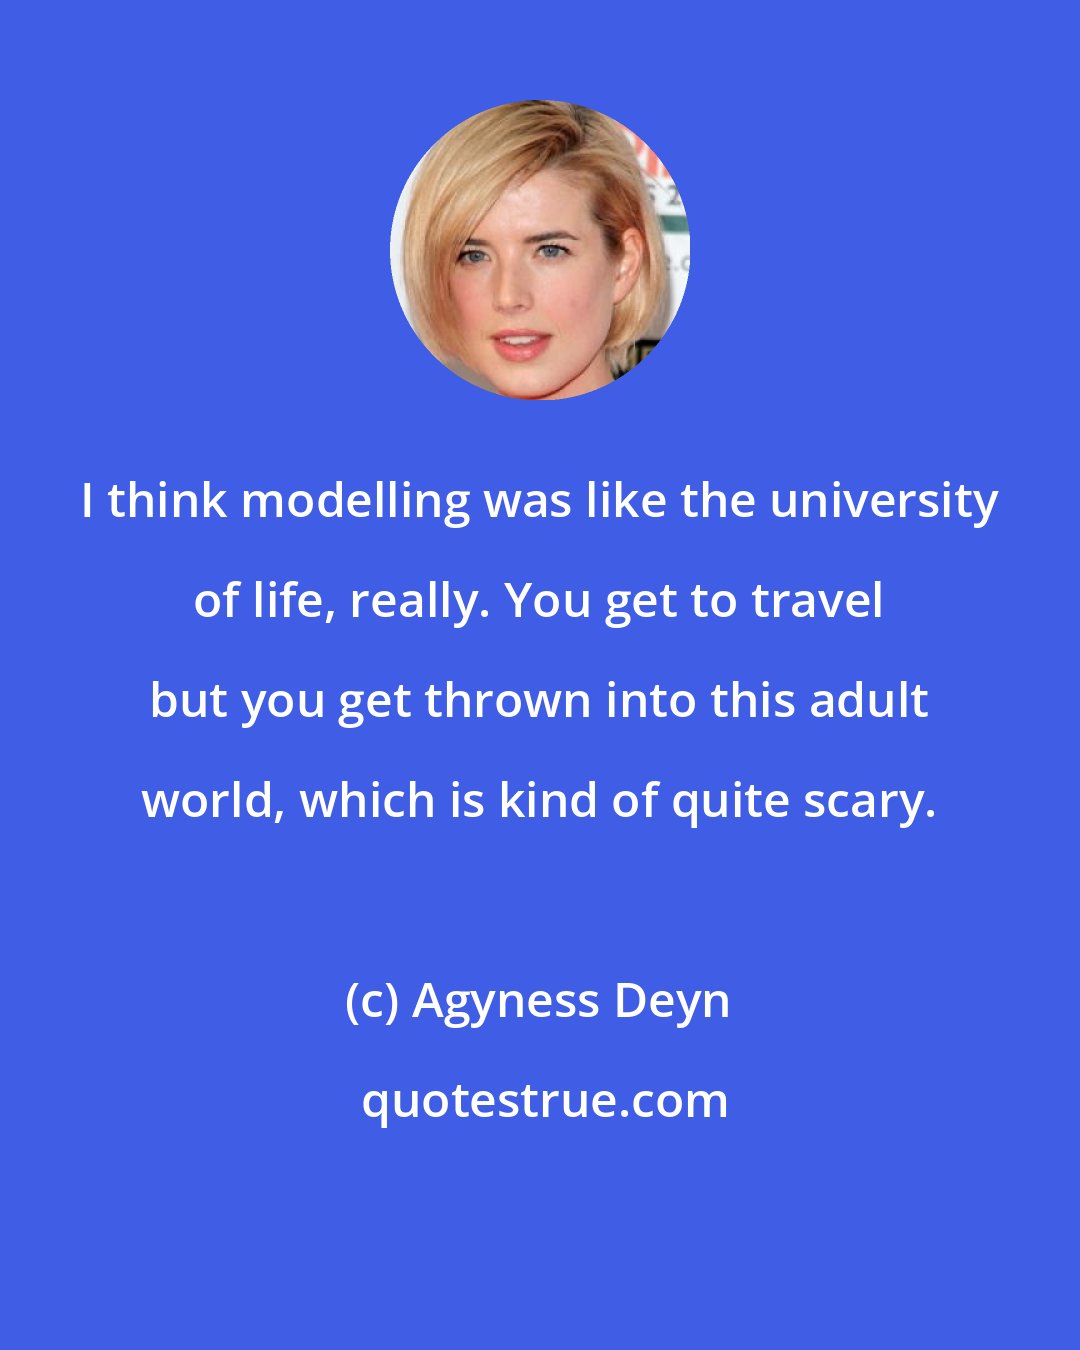 Agyness Deyn: I think modelling was like the university of life, really. You get to travel but you get thrown into this adult world, which is kind of quite scary.